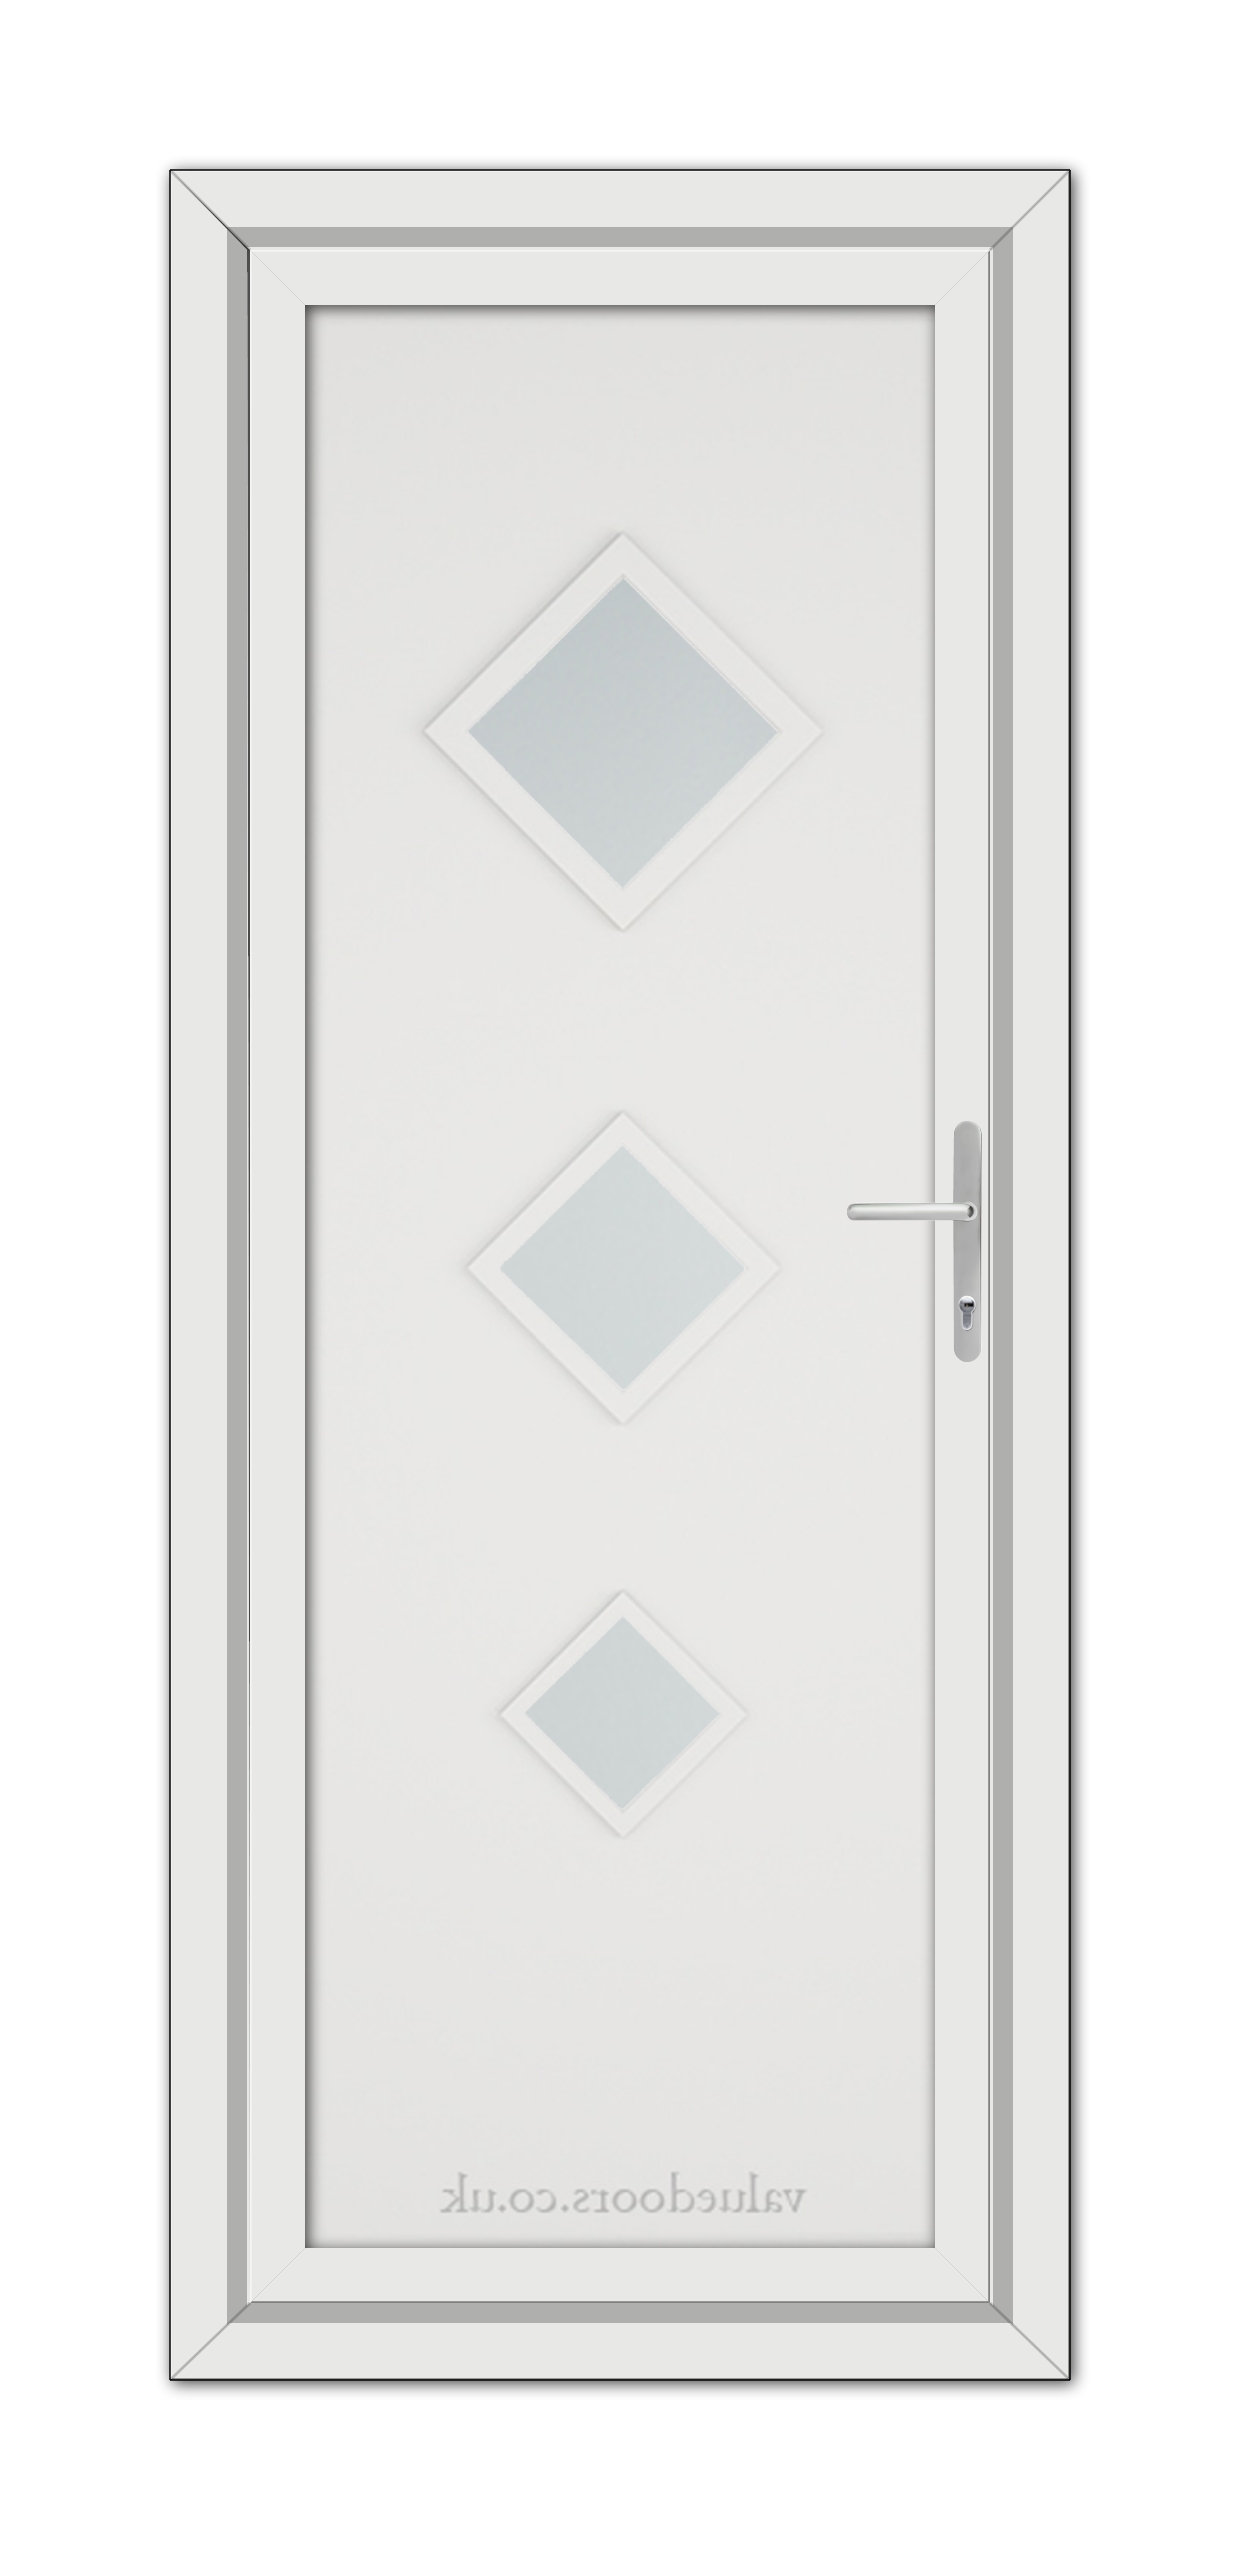 A White Modern 5123 uPVC Door with three diamond-shaped glass panels and a metallic handle, viewed from the front.